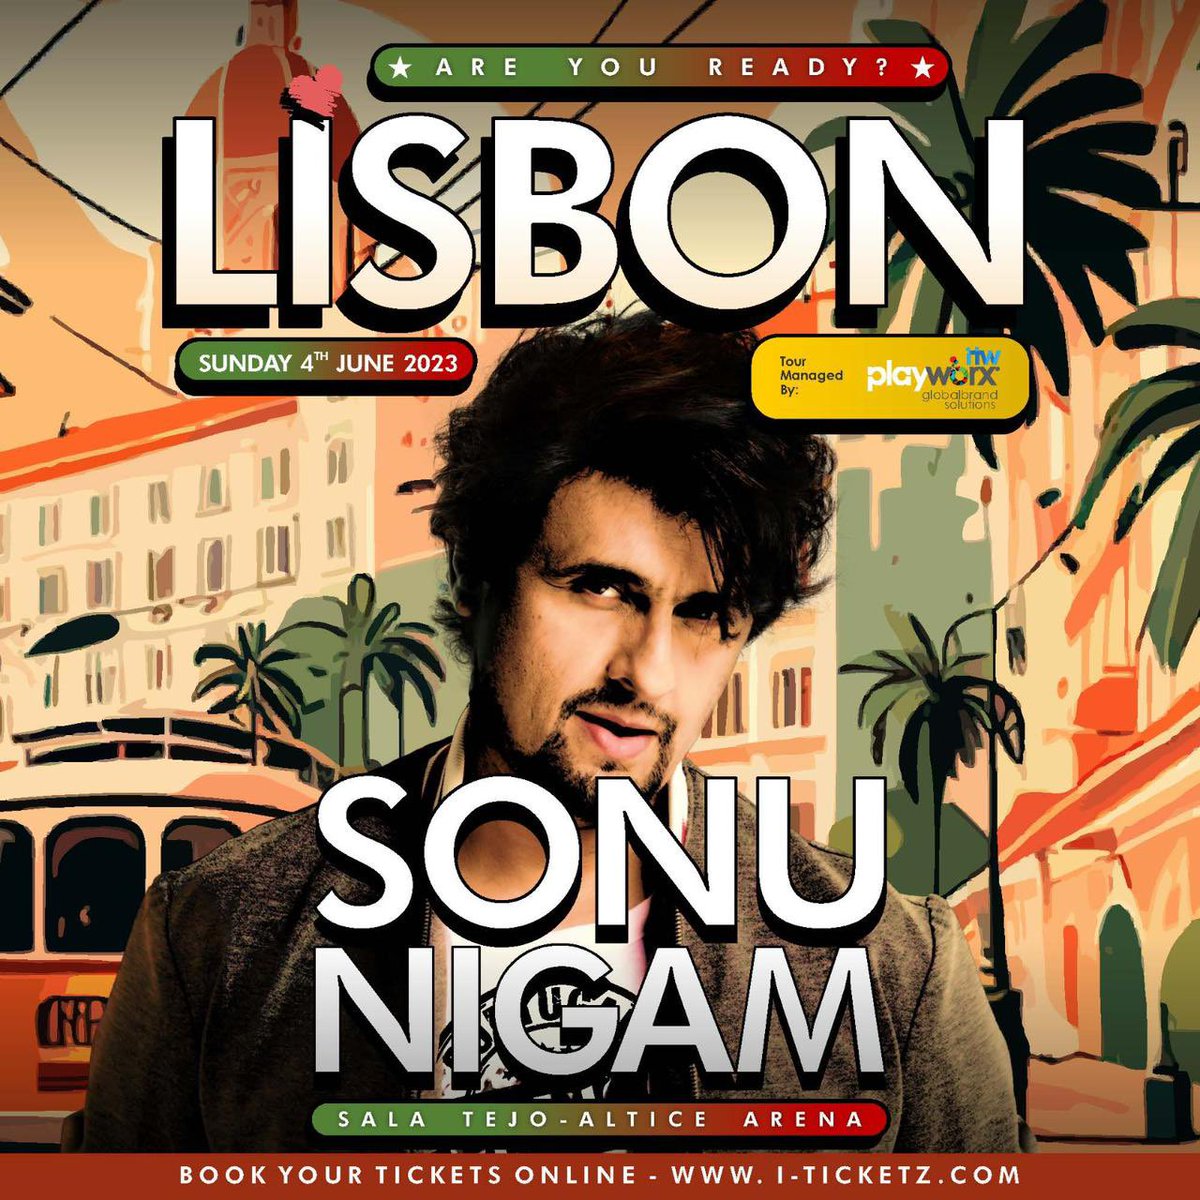 Lisbon!! Be prepared to be mesmerized by the magical voice of the one and only Padmashri recipient Sonu Nigam. Only 2 days to go! . . . #thesonunigamshow #sonunigam #sonunigamevent #itwplayworx #lisbonmusic